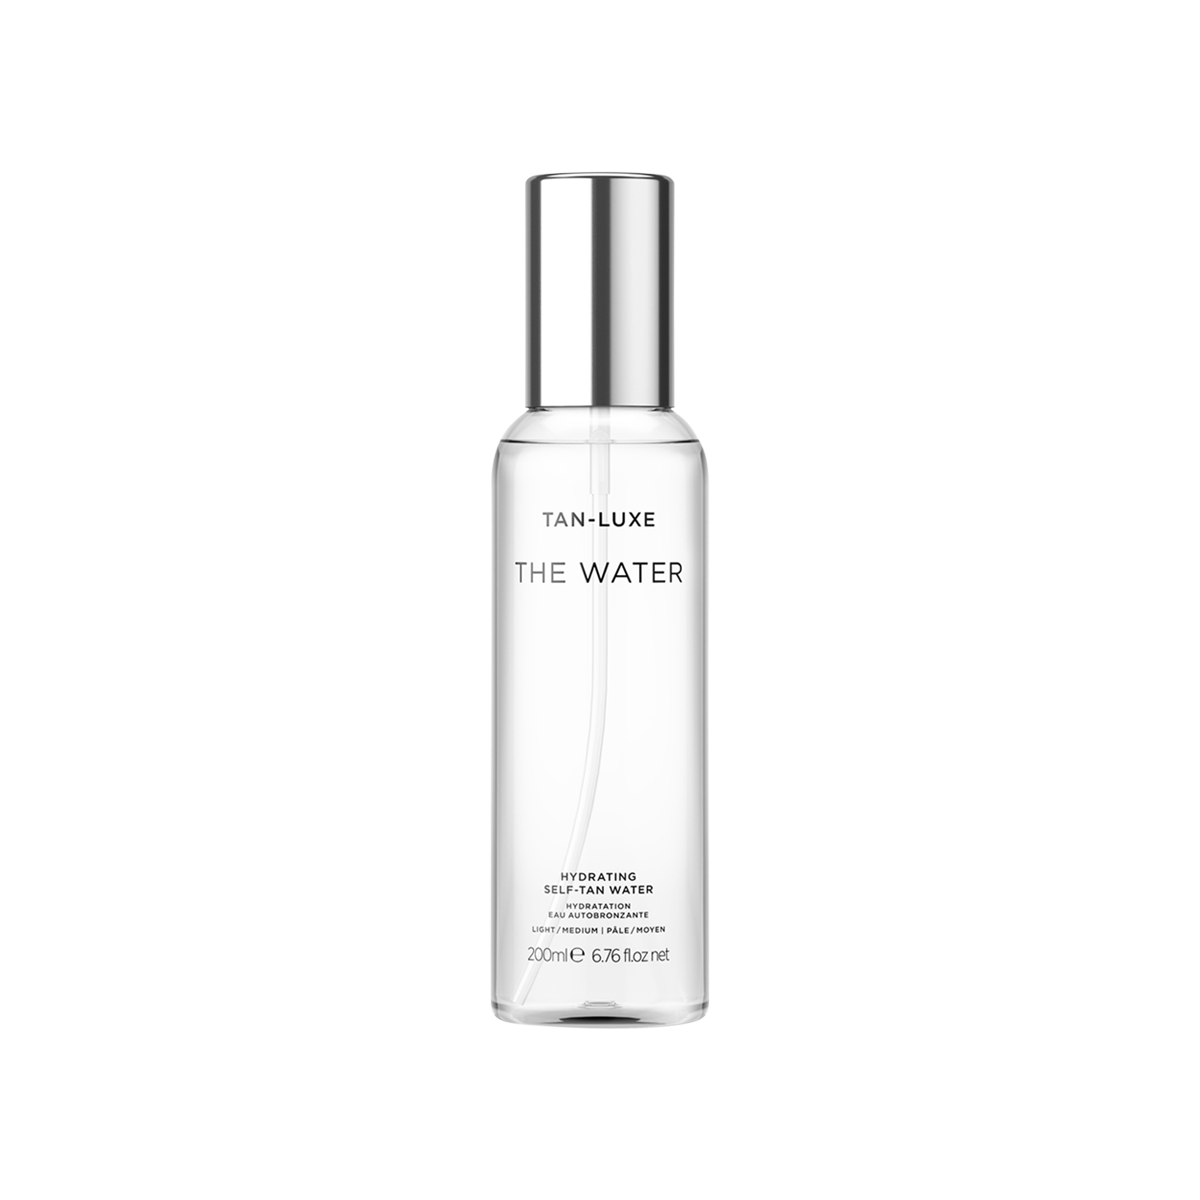 TAN-LUXE - The Water Light